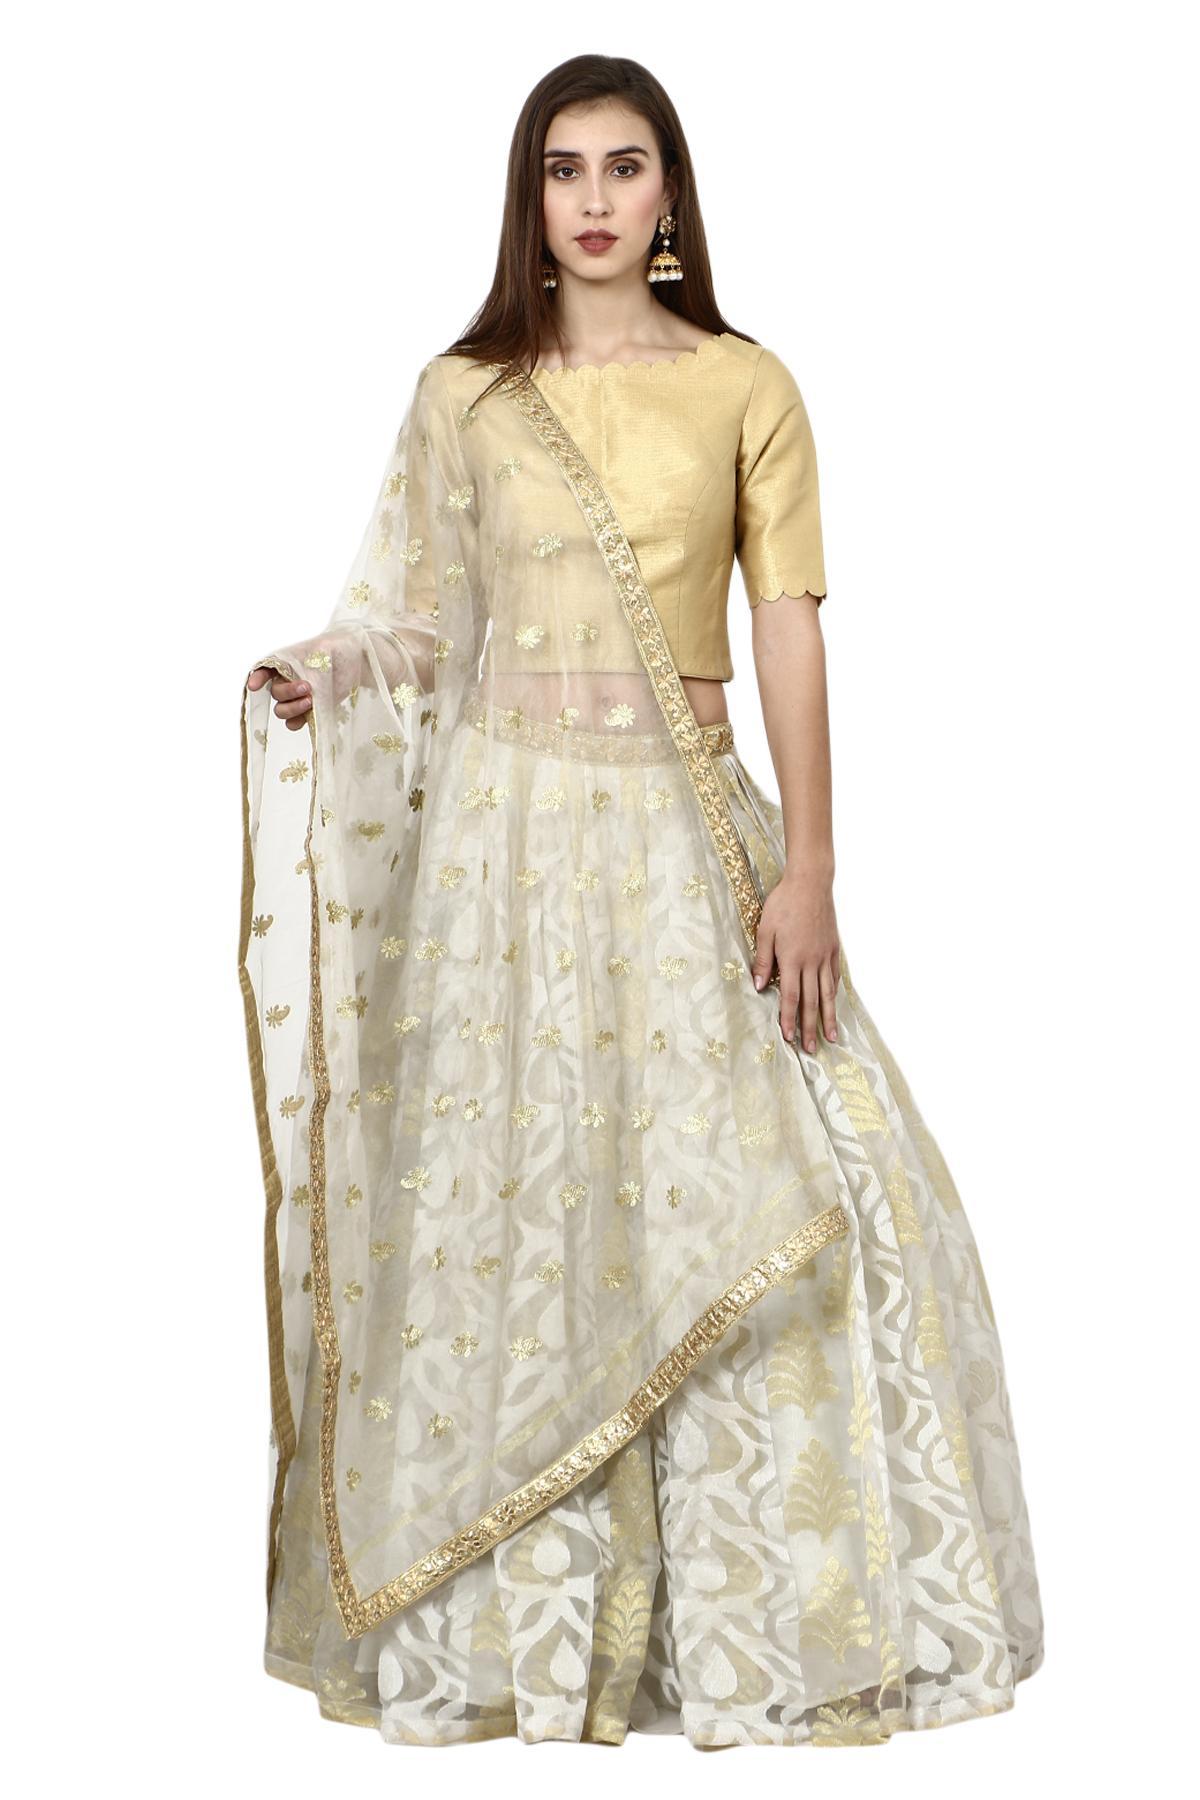 Buy Sparkly White & Gold Lehenga Choli for Women Silk Semi Stitched Indian  Pakistani South Asian Bridal Bridesmaid Wedding Dresses Outfits Online in  India - Etsy